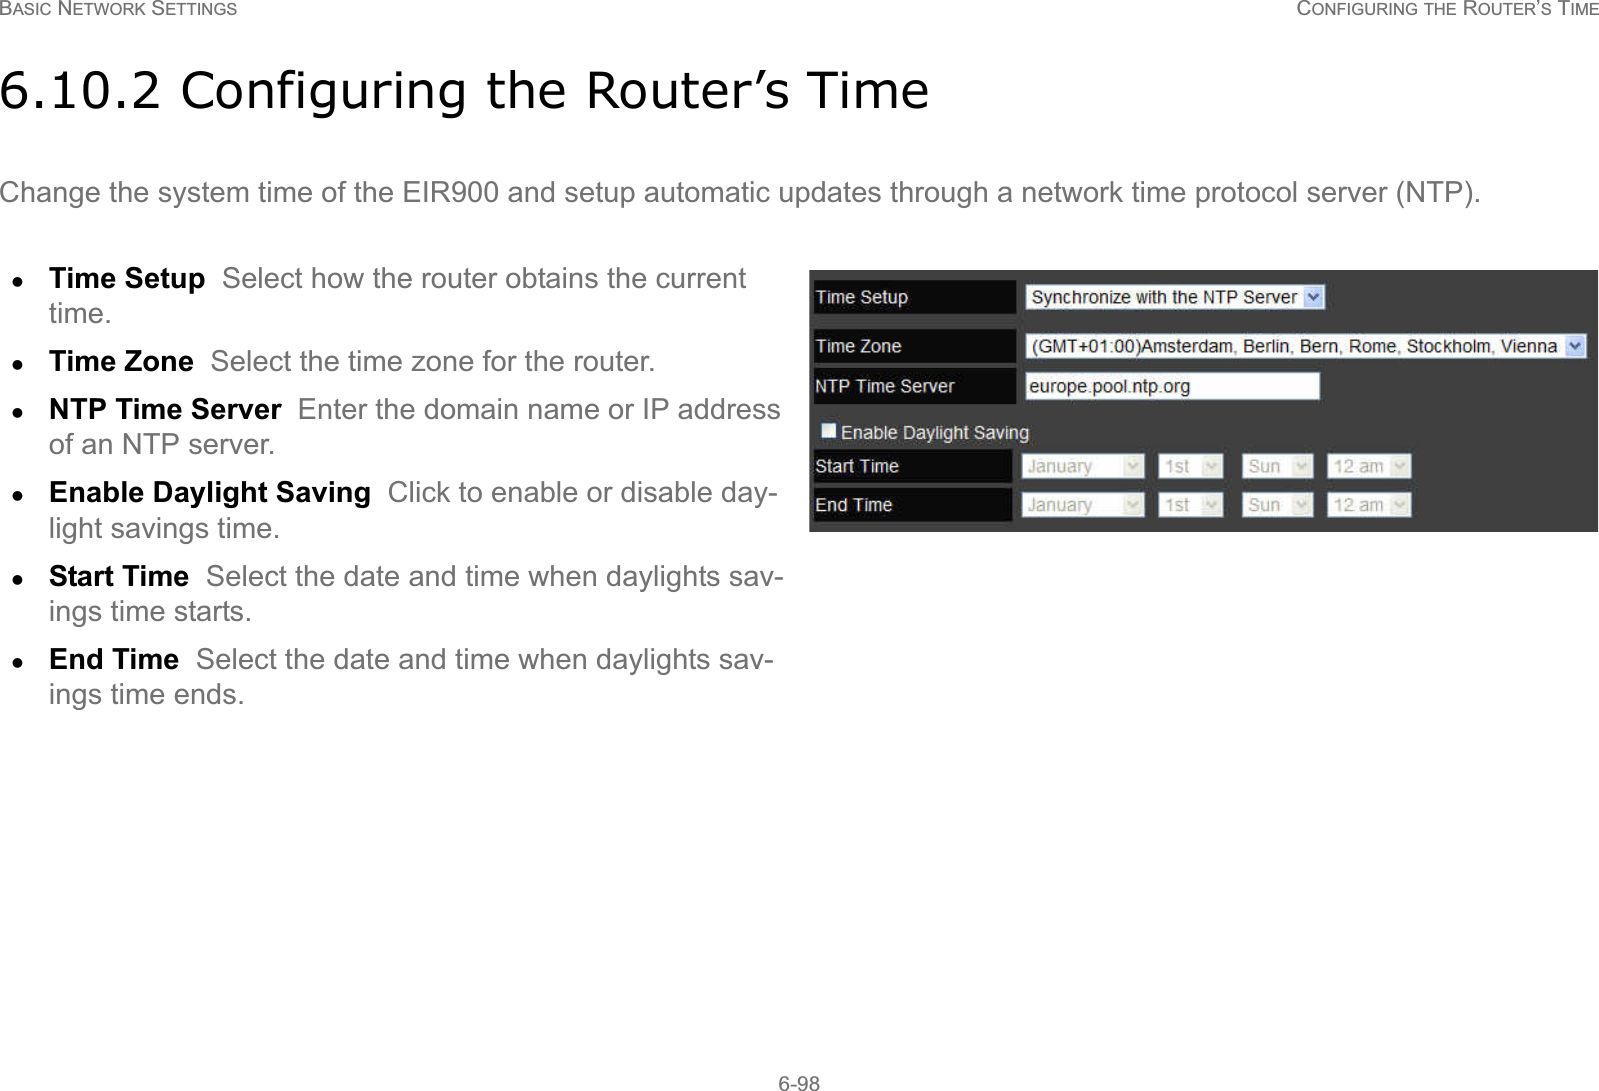 BASIC NETWORK SETTINGS CONFIGURING THE ROUTER’S TIME6-986.10.2 Configuring the Router’s TimeChange the system time of the EIR900 and setup automatic updates through a network time protocol server (NTP).zTime Setup  Select how the router obtains the current time.zTime Zone  Select the time zone for the router.zNTP Time Server  Enter the domain name or IP address of an NTP server.zEnable Daylight Saving  Click to enable or disable day-light savings time.zStart Time  Select the date and time when daylights sav-ings time starts.zEnd Time  Select the date and time when daylights sav-ings time ends.